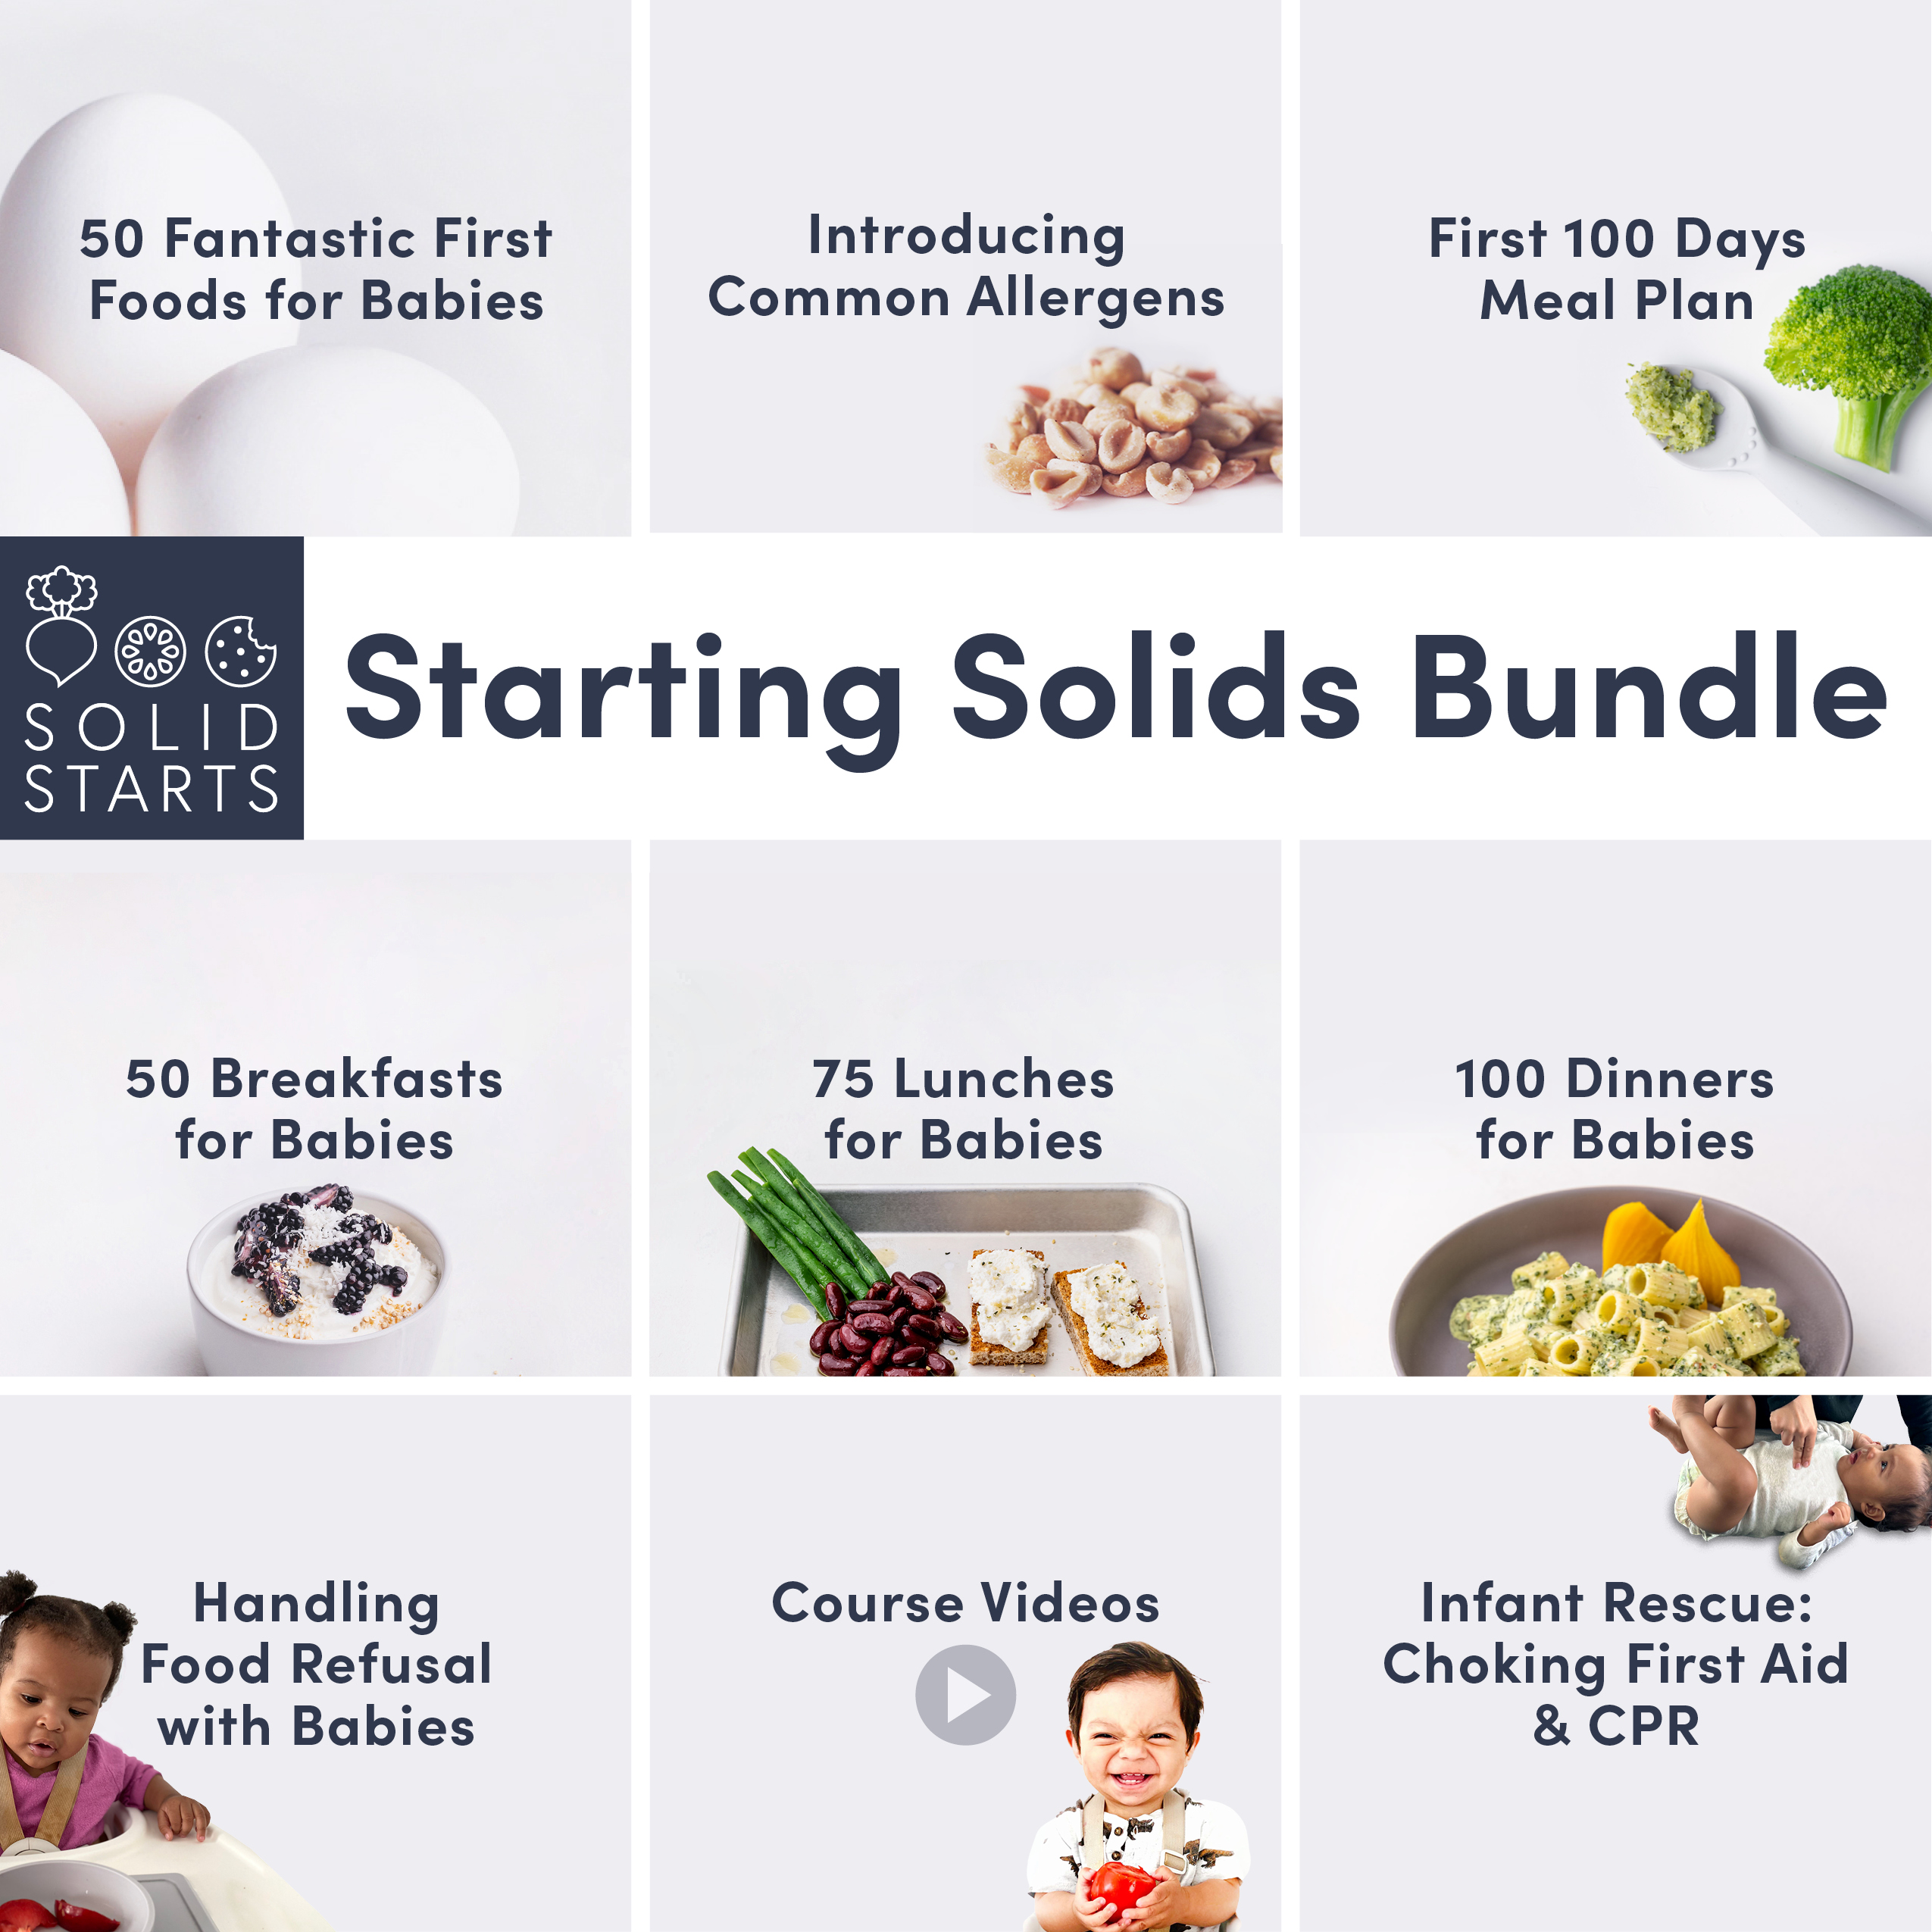 Top 7 baby feeding essentials for starting solids 